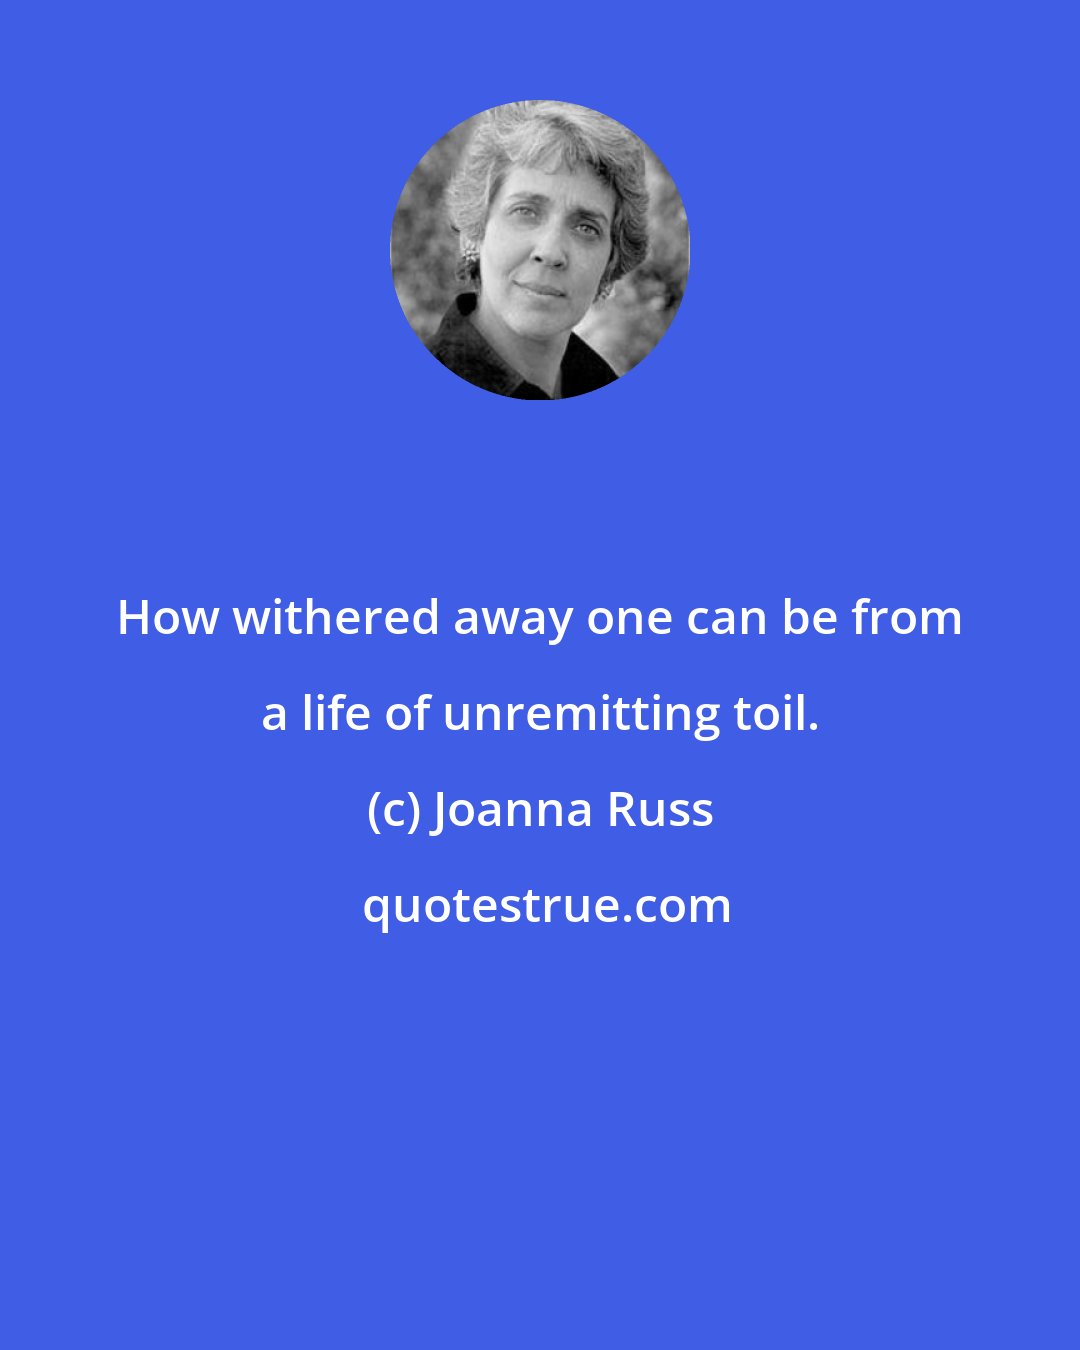 Joanna Russ: How withered away one can be from a life of unremitting toil.